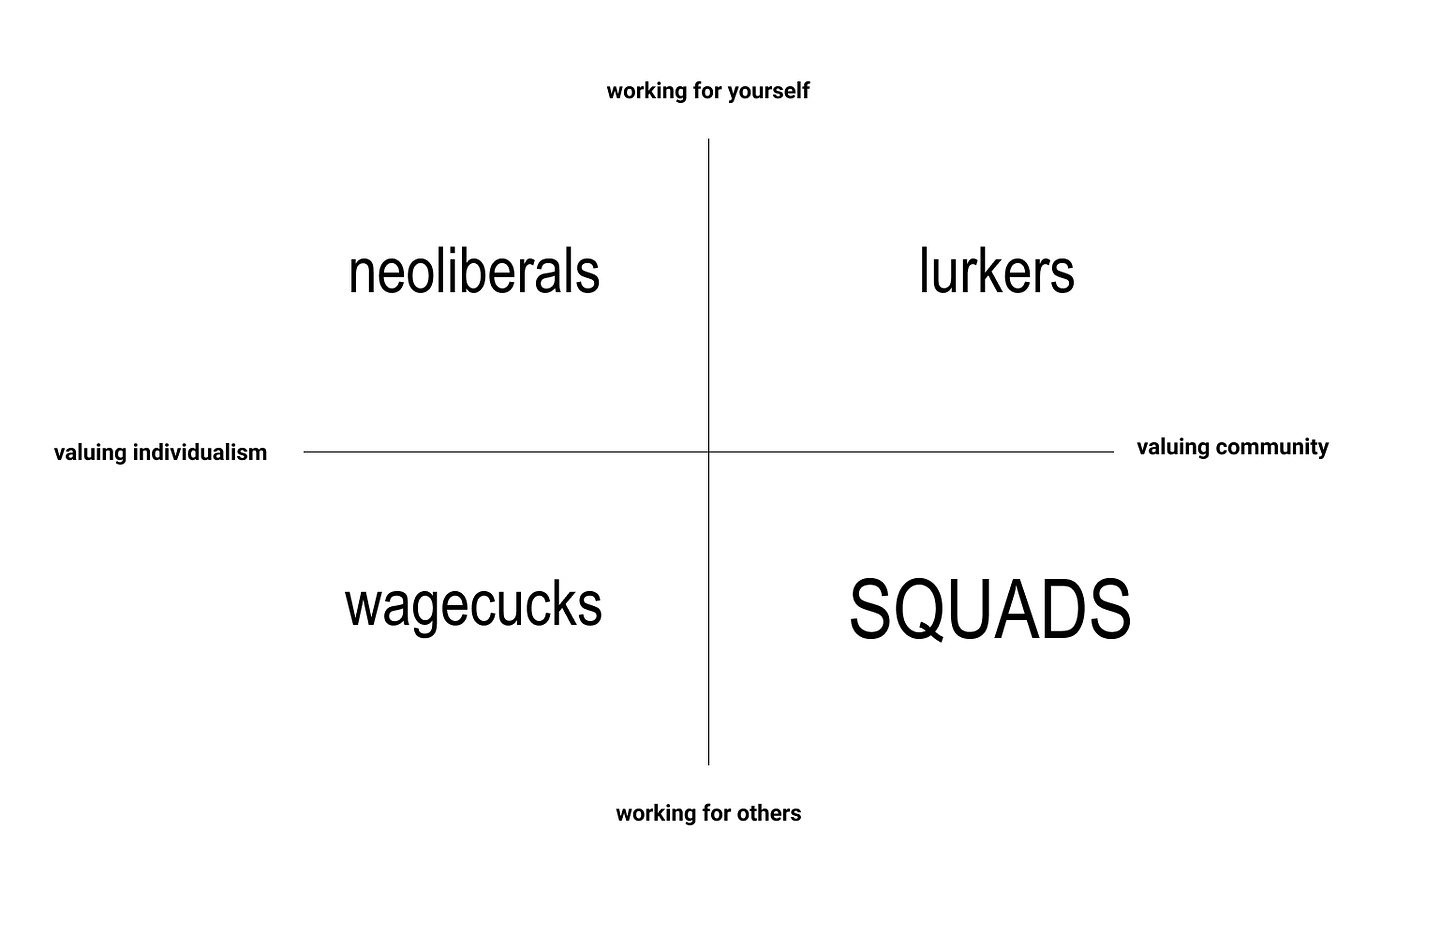 Squad collectivism is a better form of autonomy than neoliberal individualism